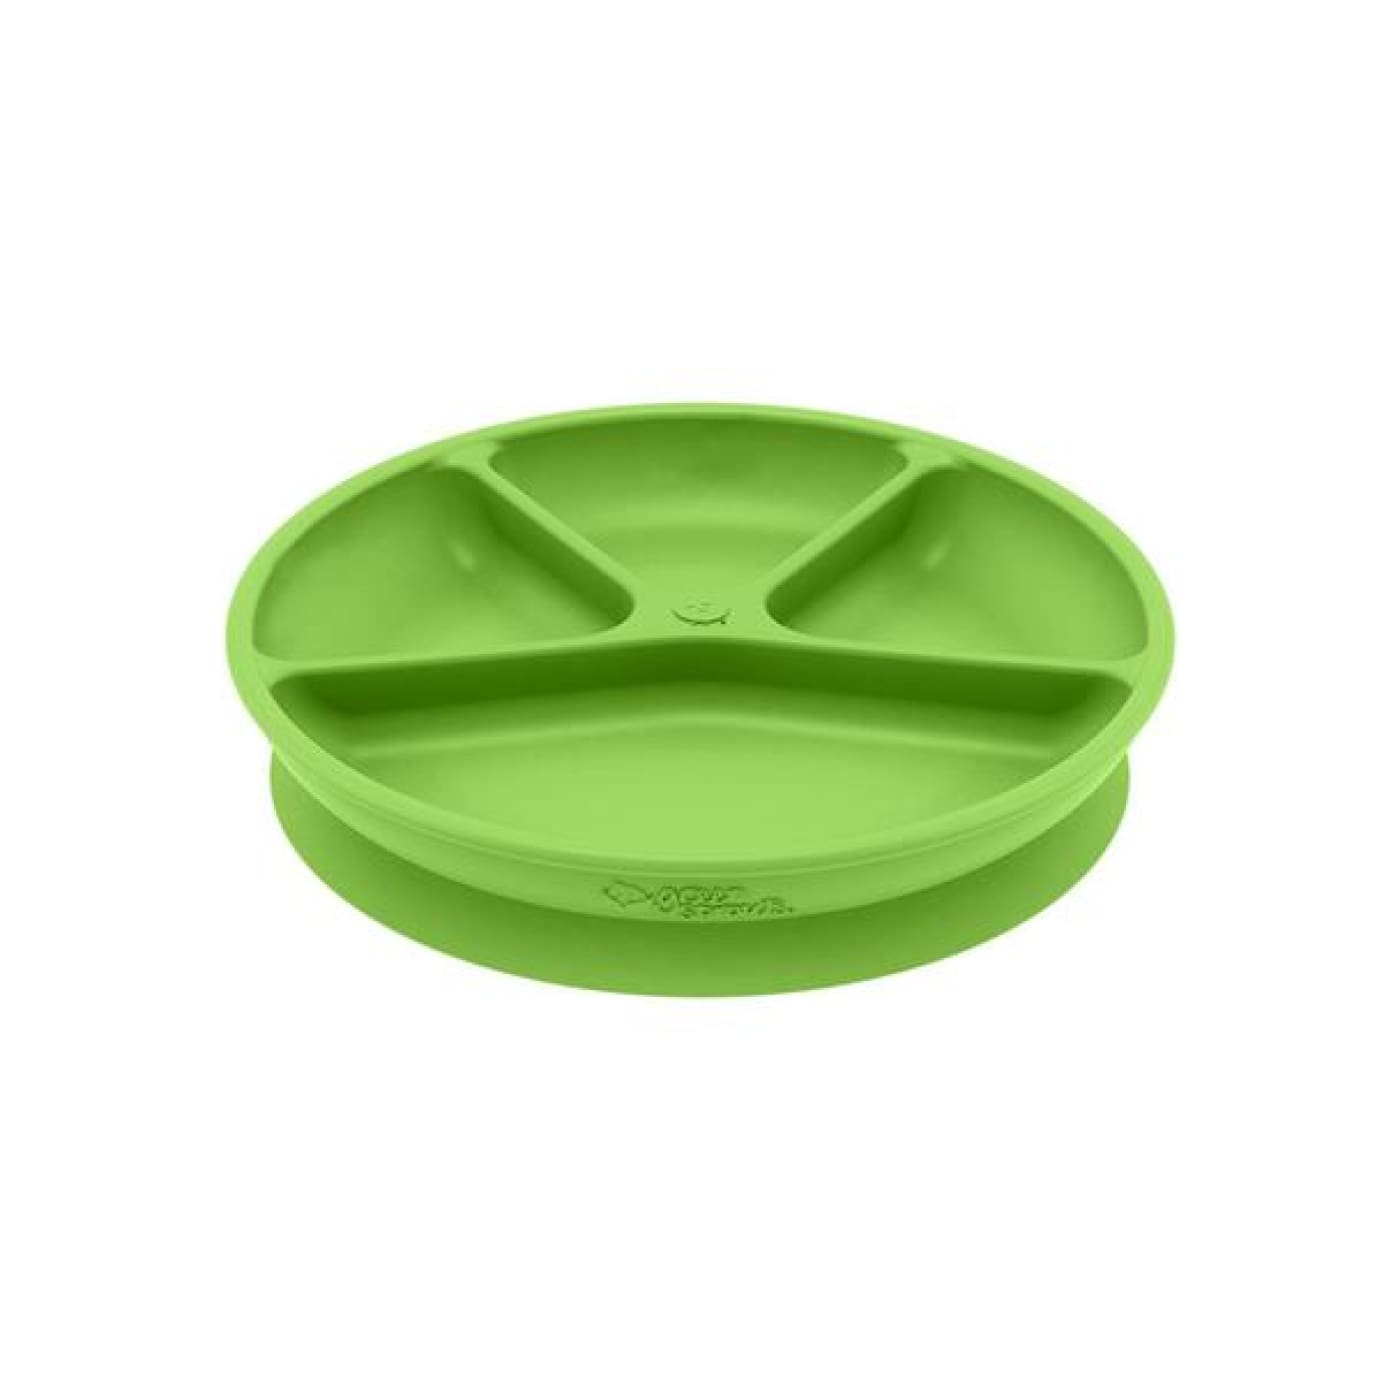 Green Sprouts Learning Plate 12m+ - Green - 12M+ - NURSING & FEEDING - CUTLERY/PLATES/BOWLS/TOYS